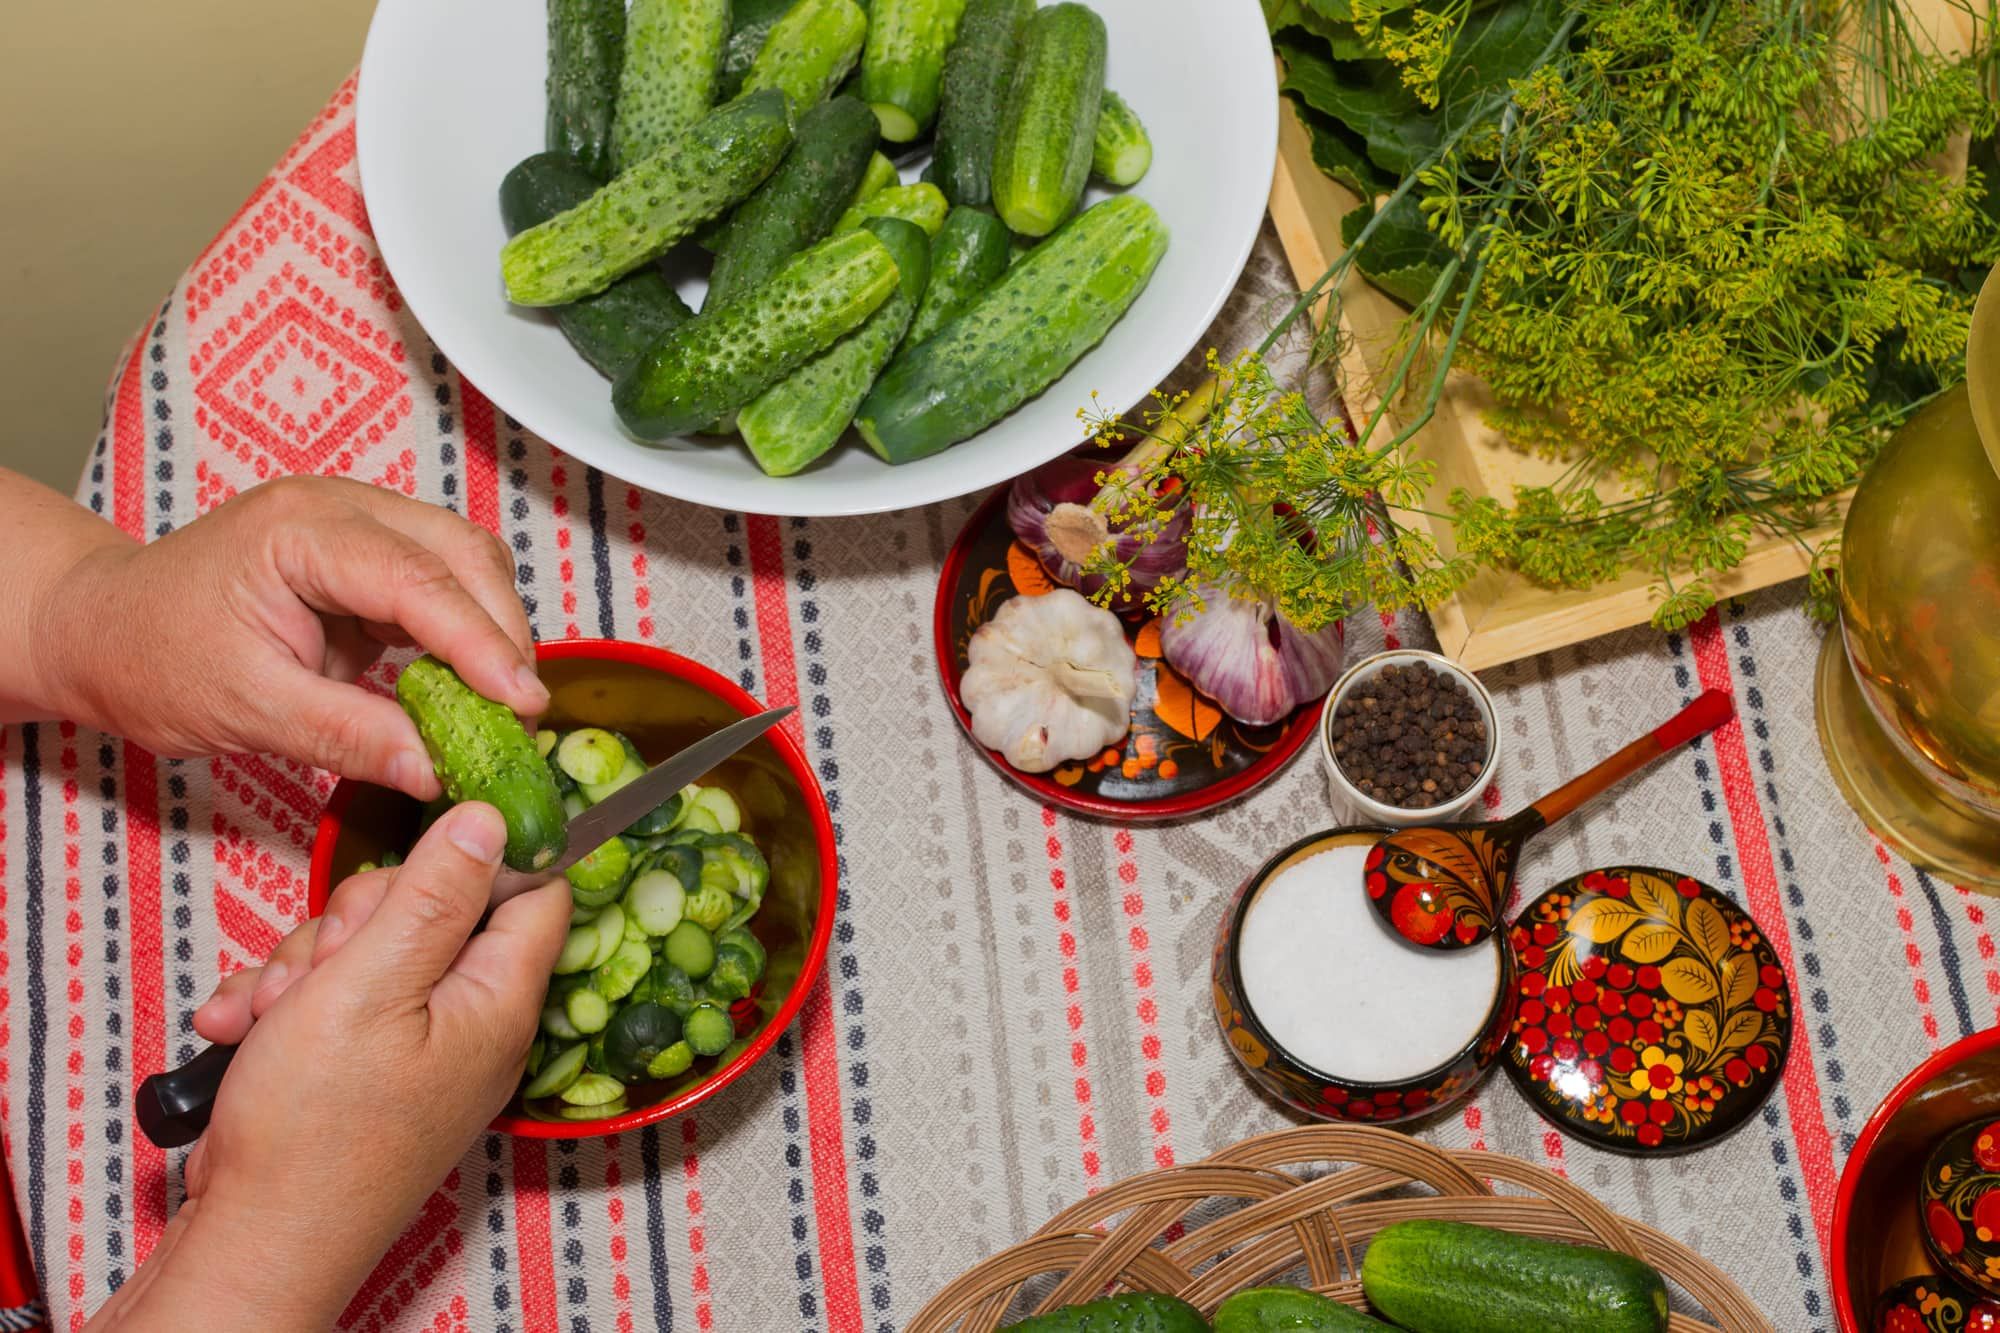 Pickling cucumbers, pickling - hands close-up, cucumber, herbs, spices, salt, hohloma, Russian style. Recipes, step execution. Harvesting vegetables in store.